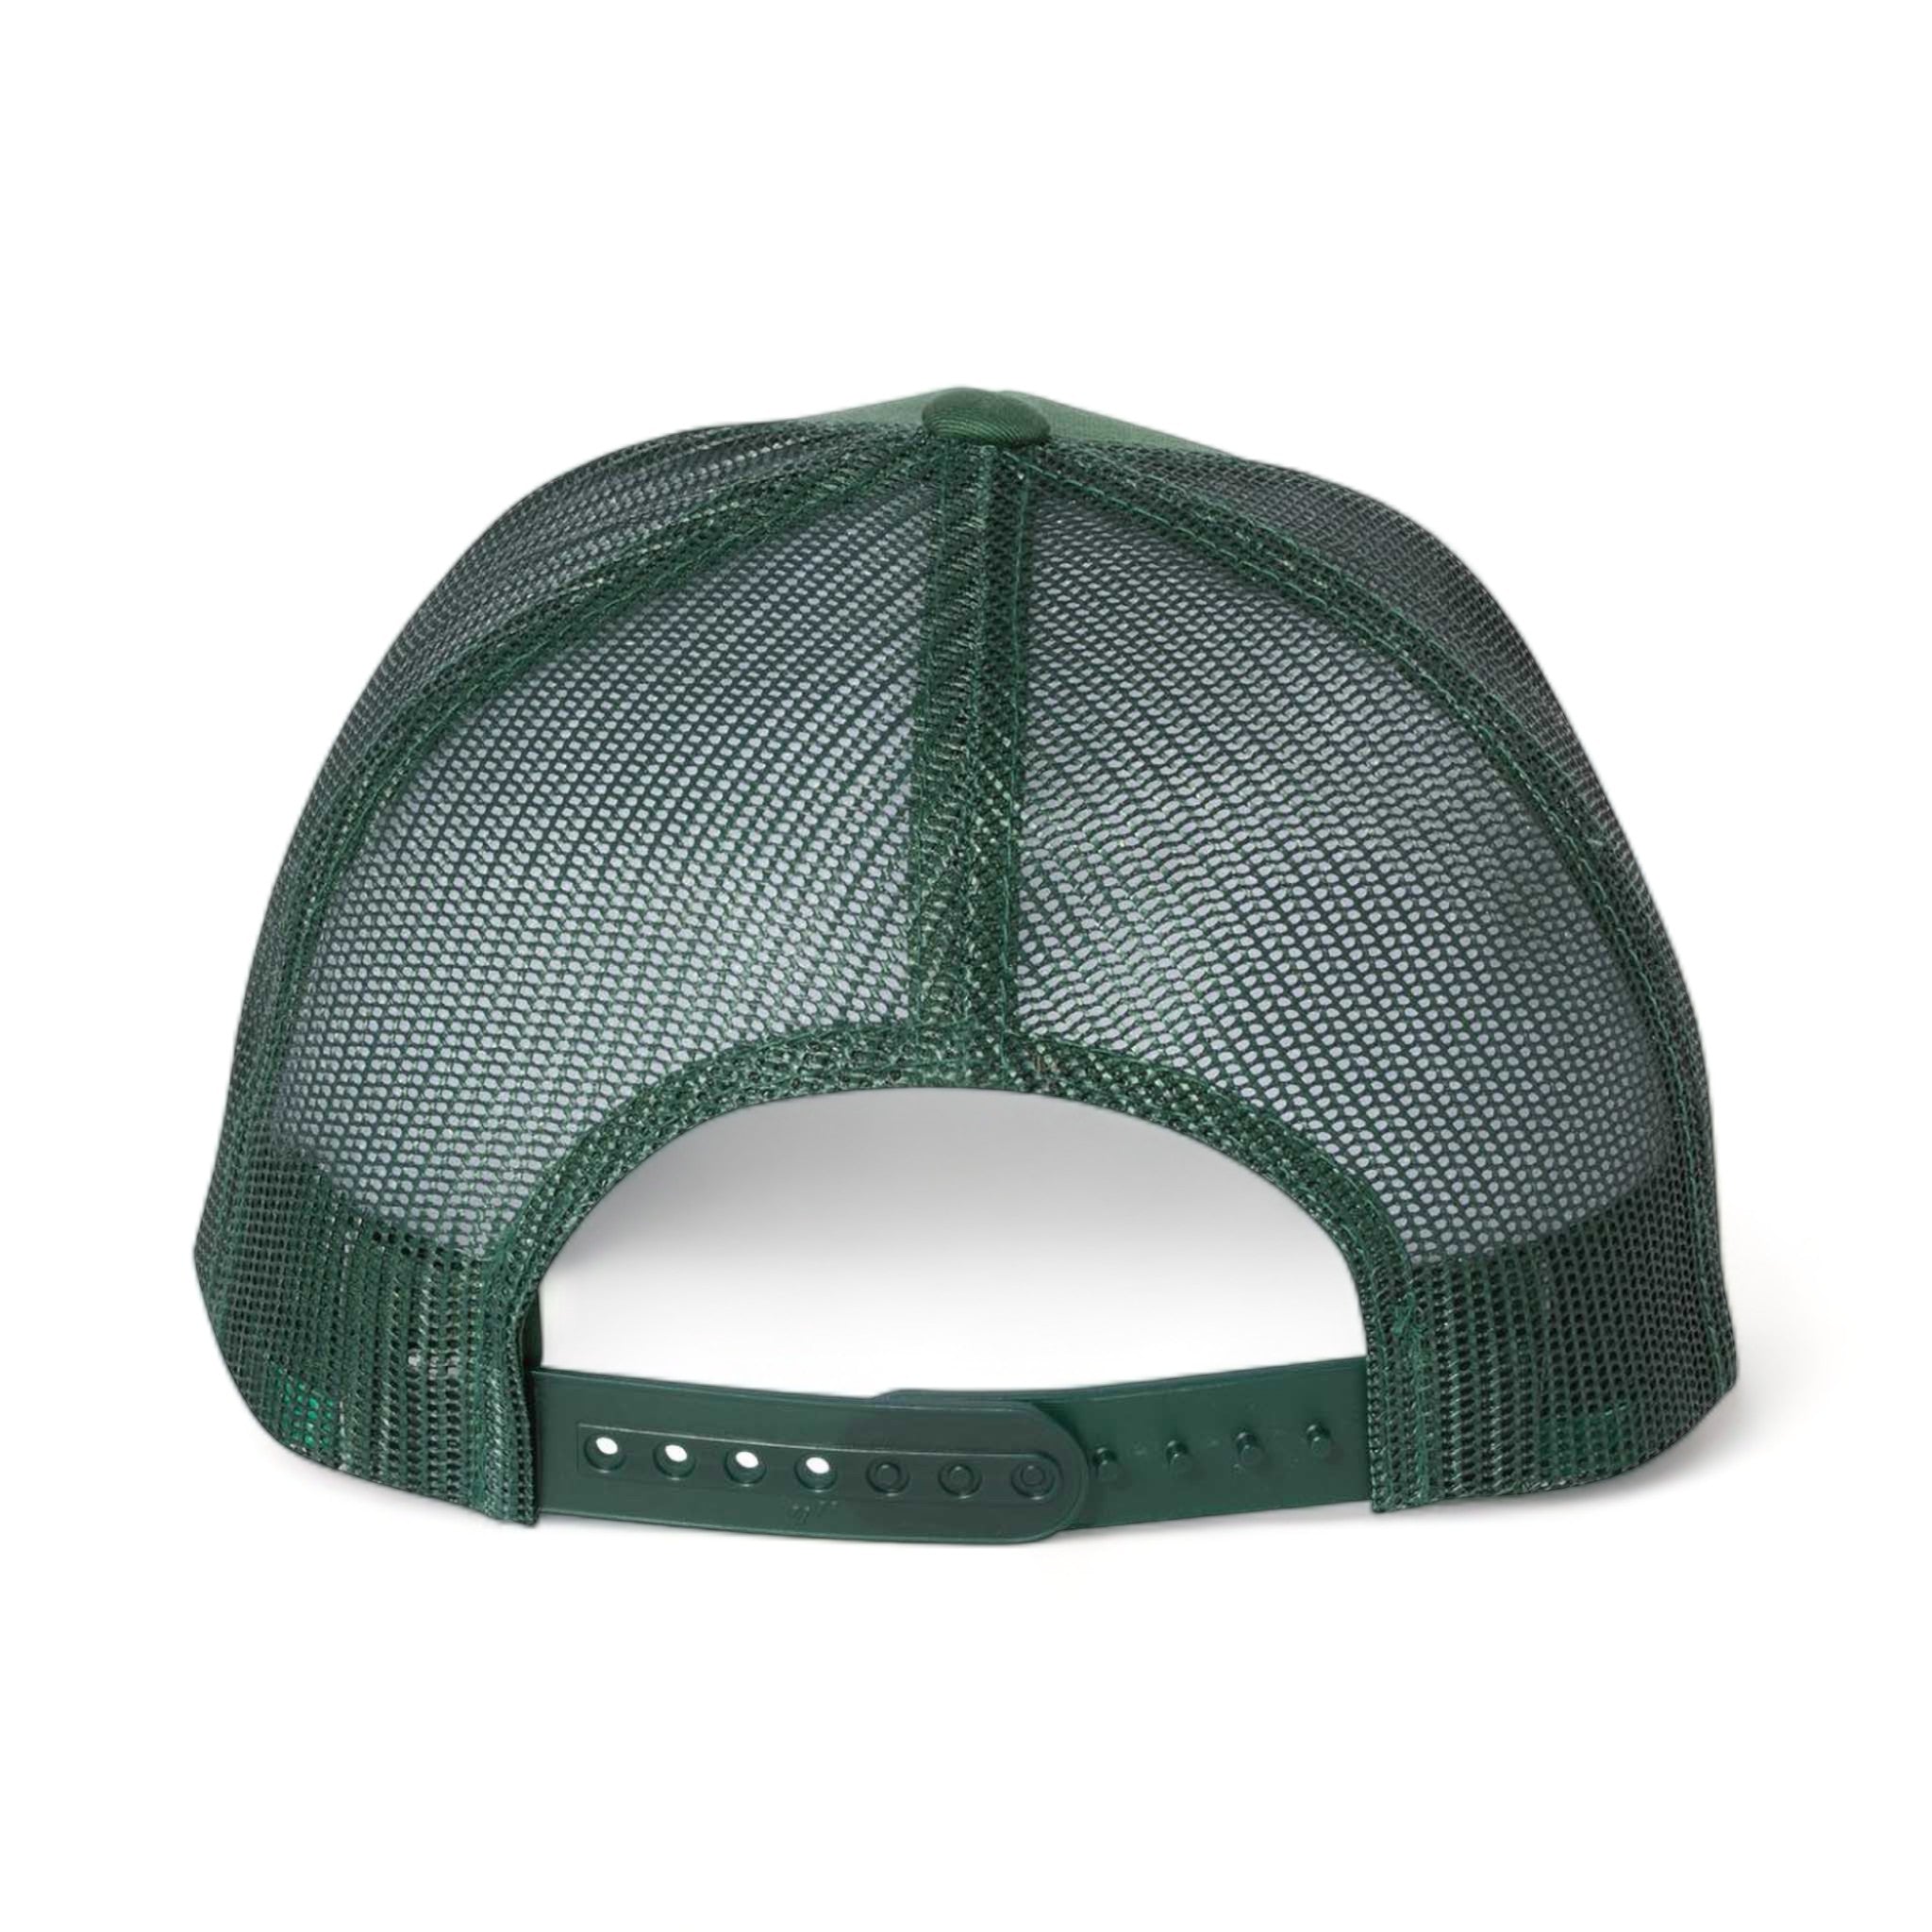 Back view of YP Classics 6606 custom hat in evergreen